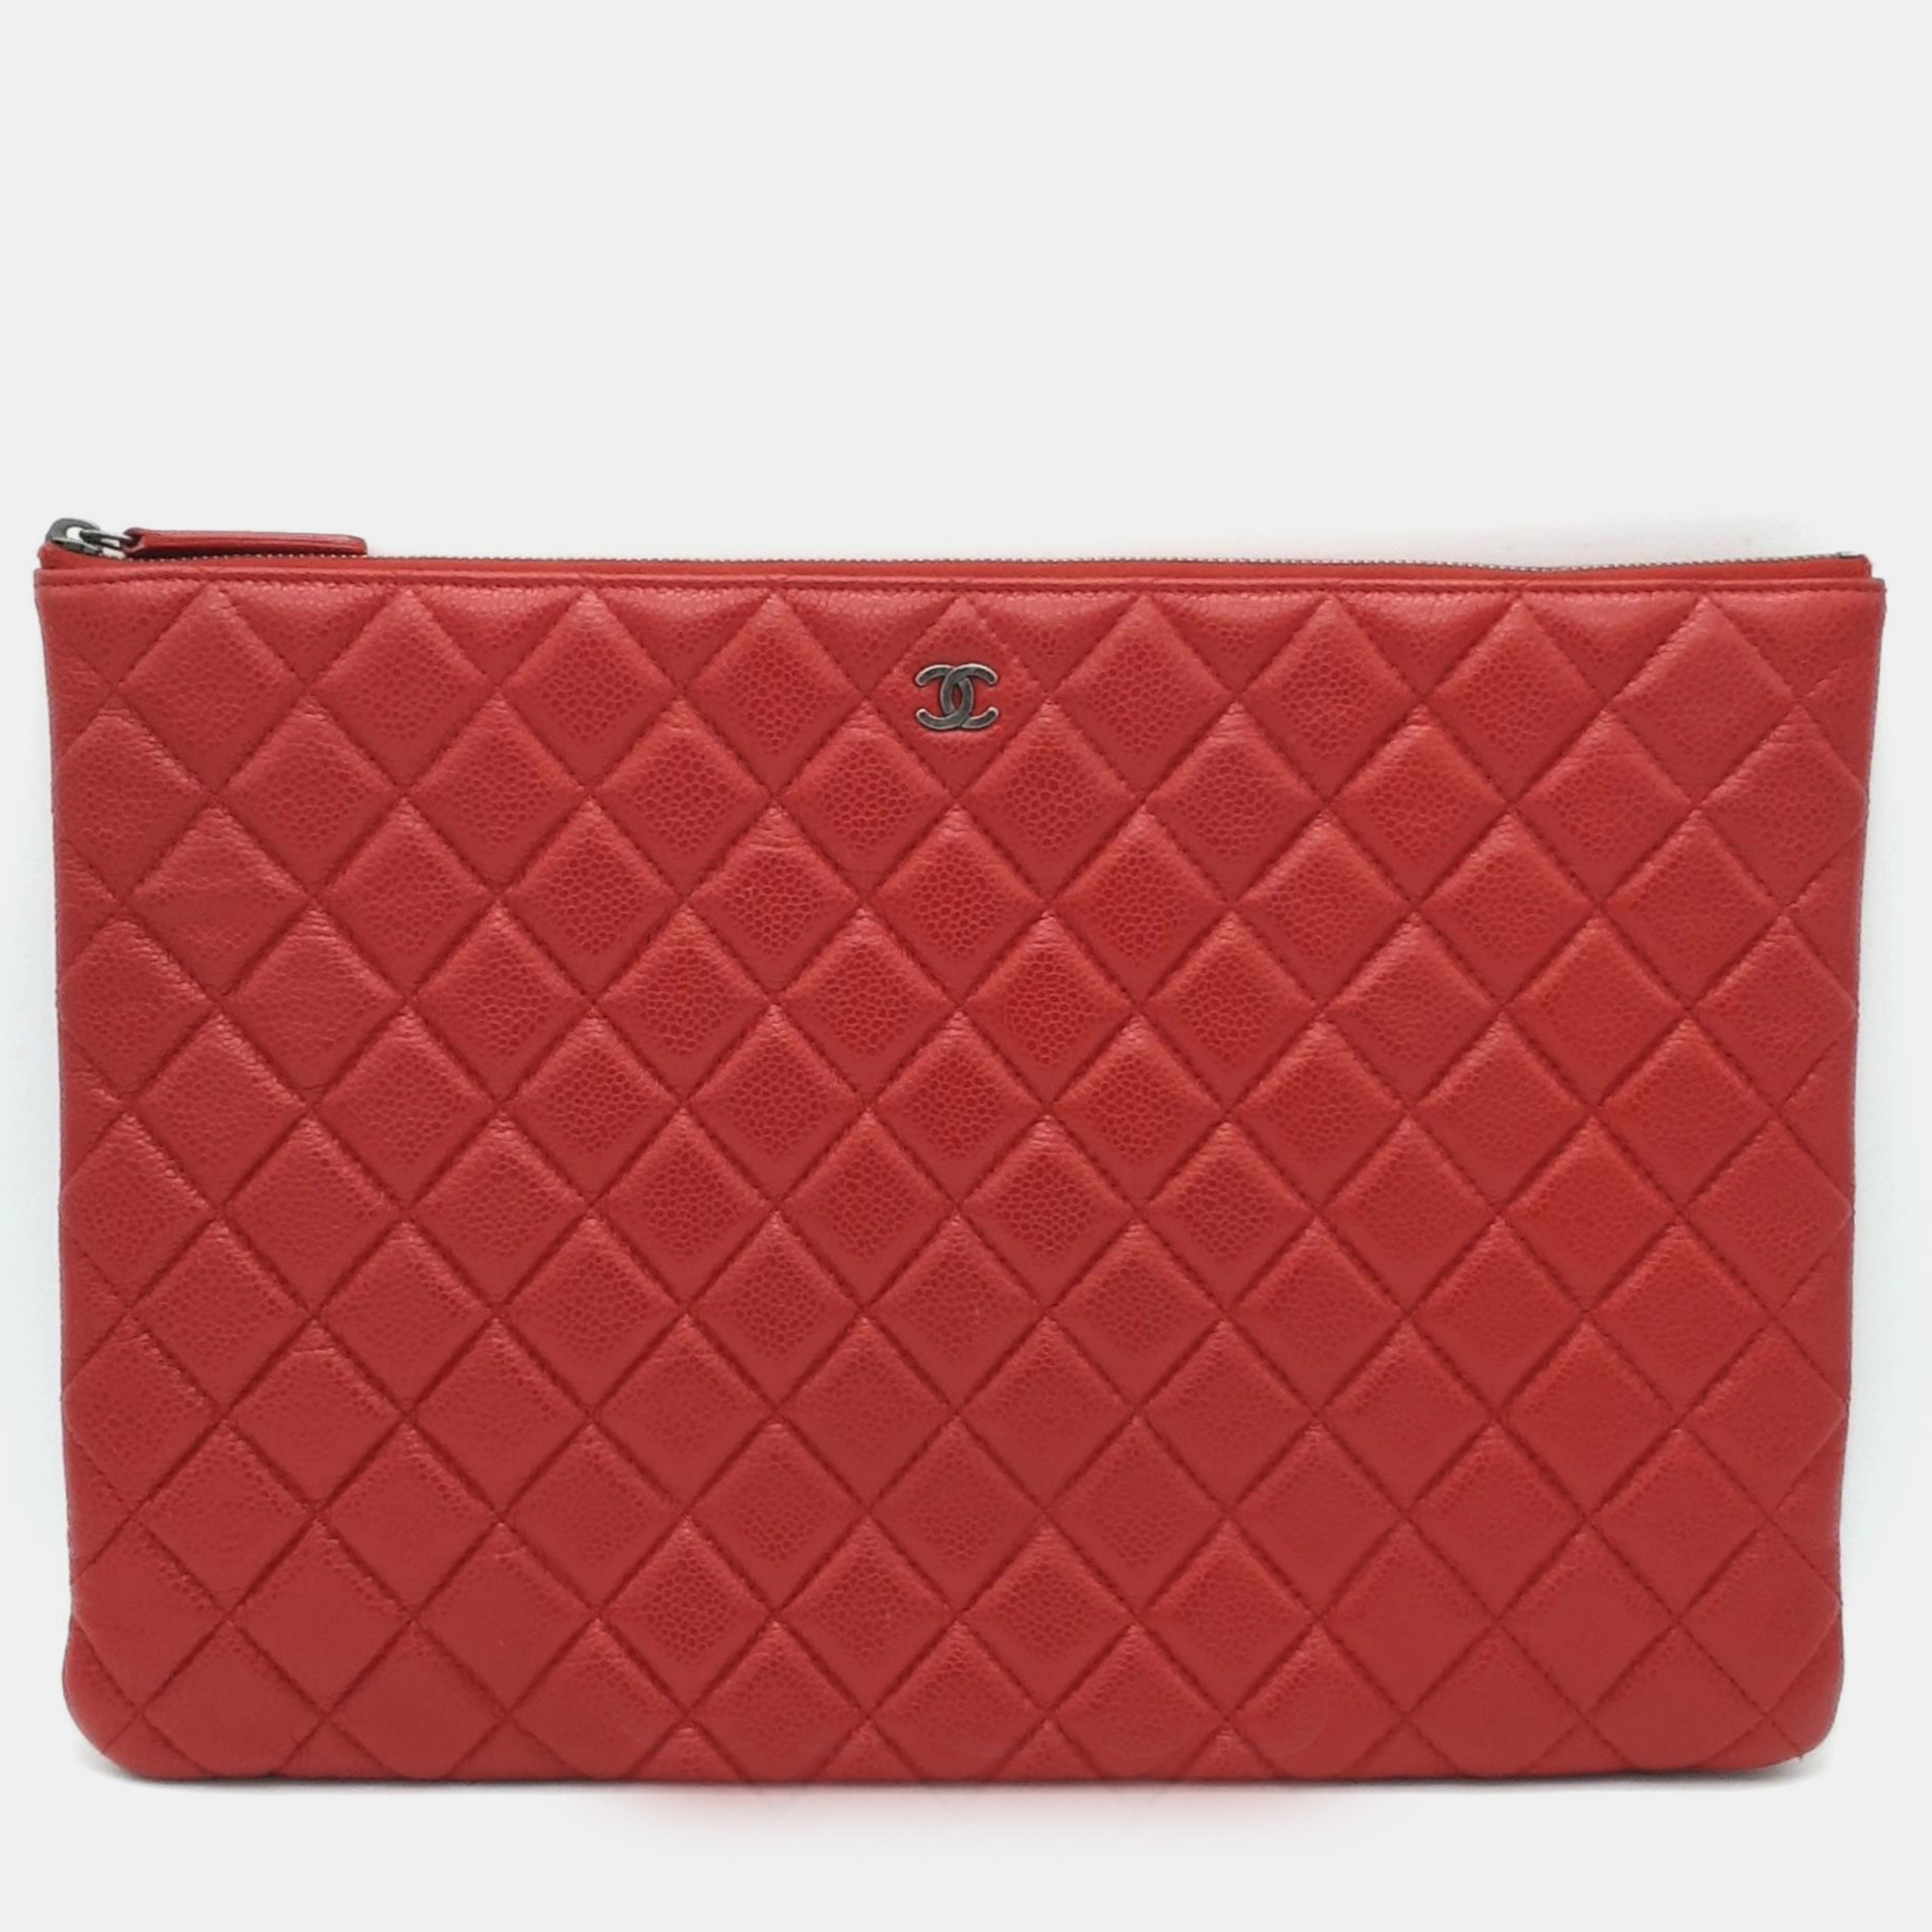 Chanel red caviar leather large clutch bag